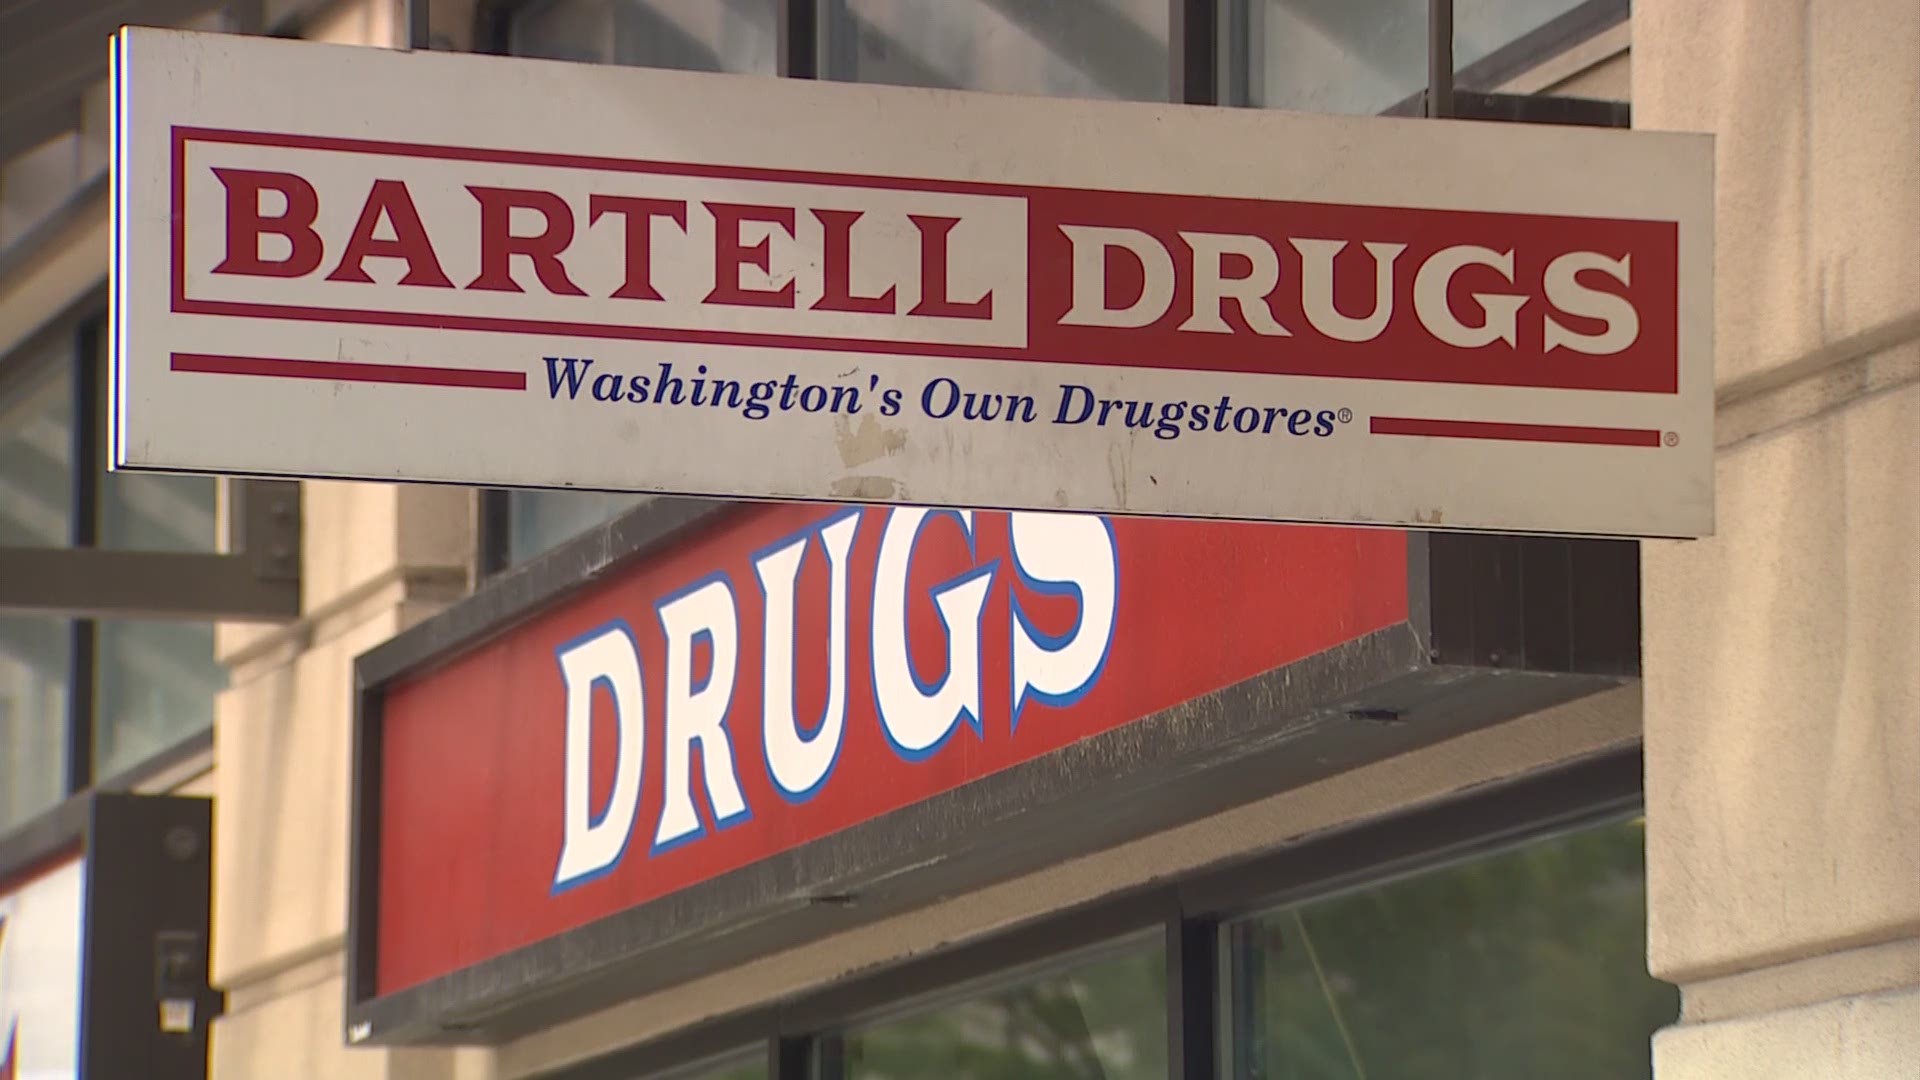 Exterior video of the Bartell Drugs location at 3rd Avenue and Union Street in downtown Seattle.